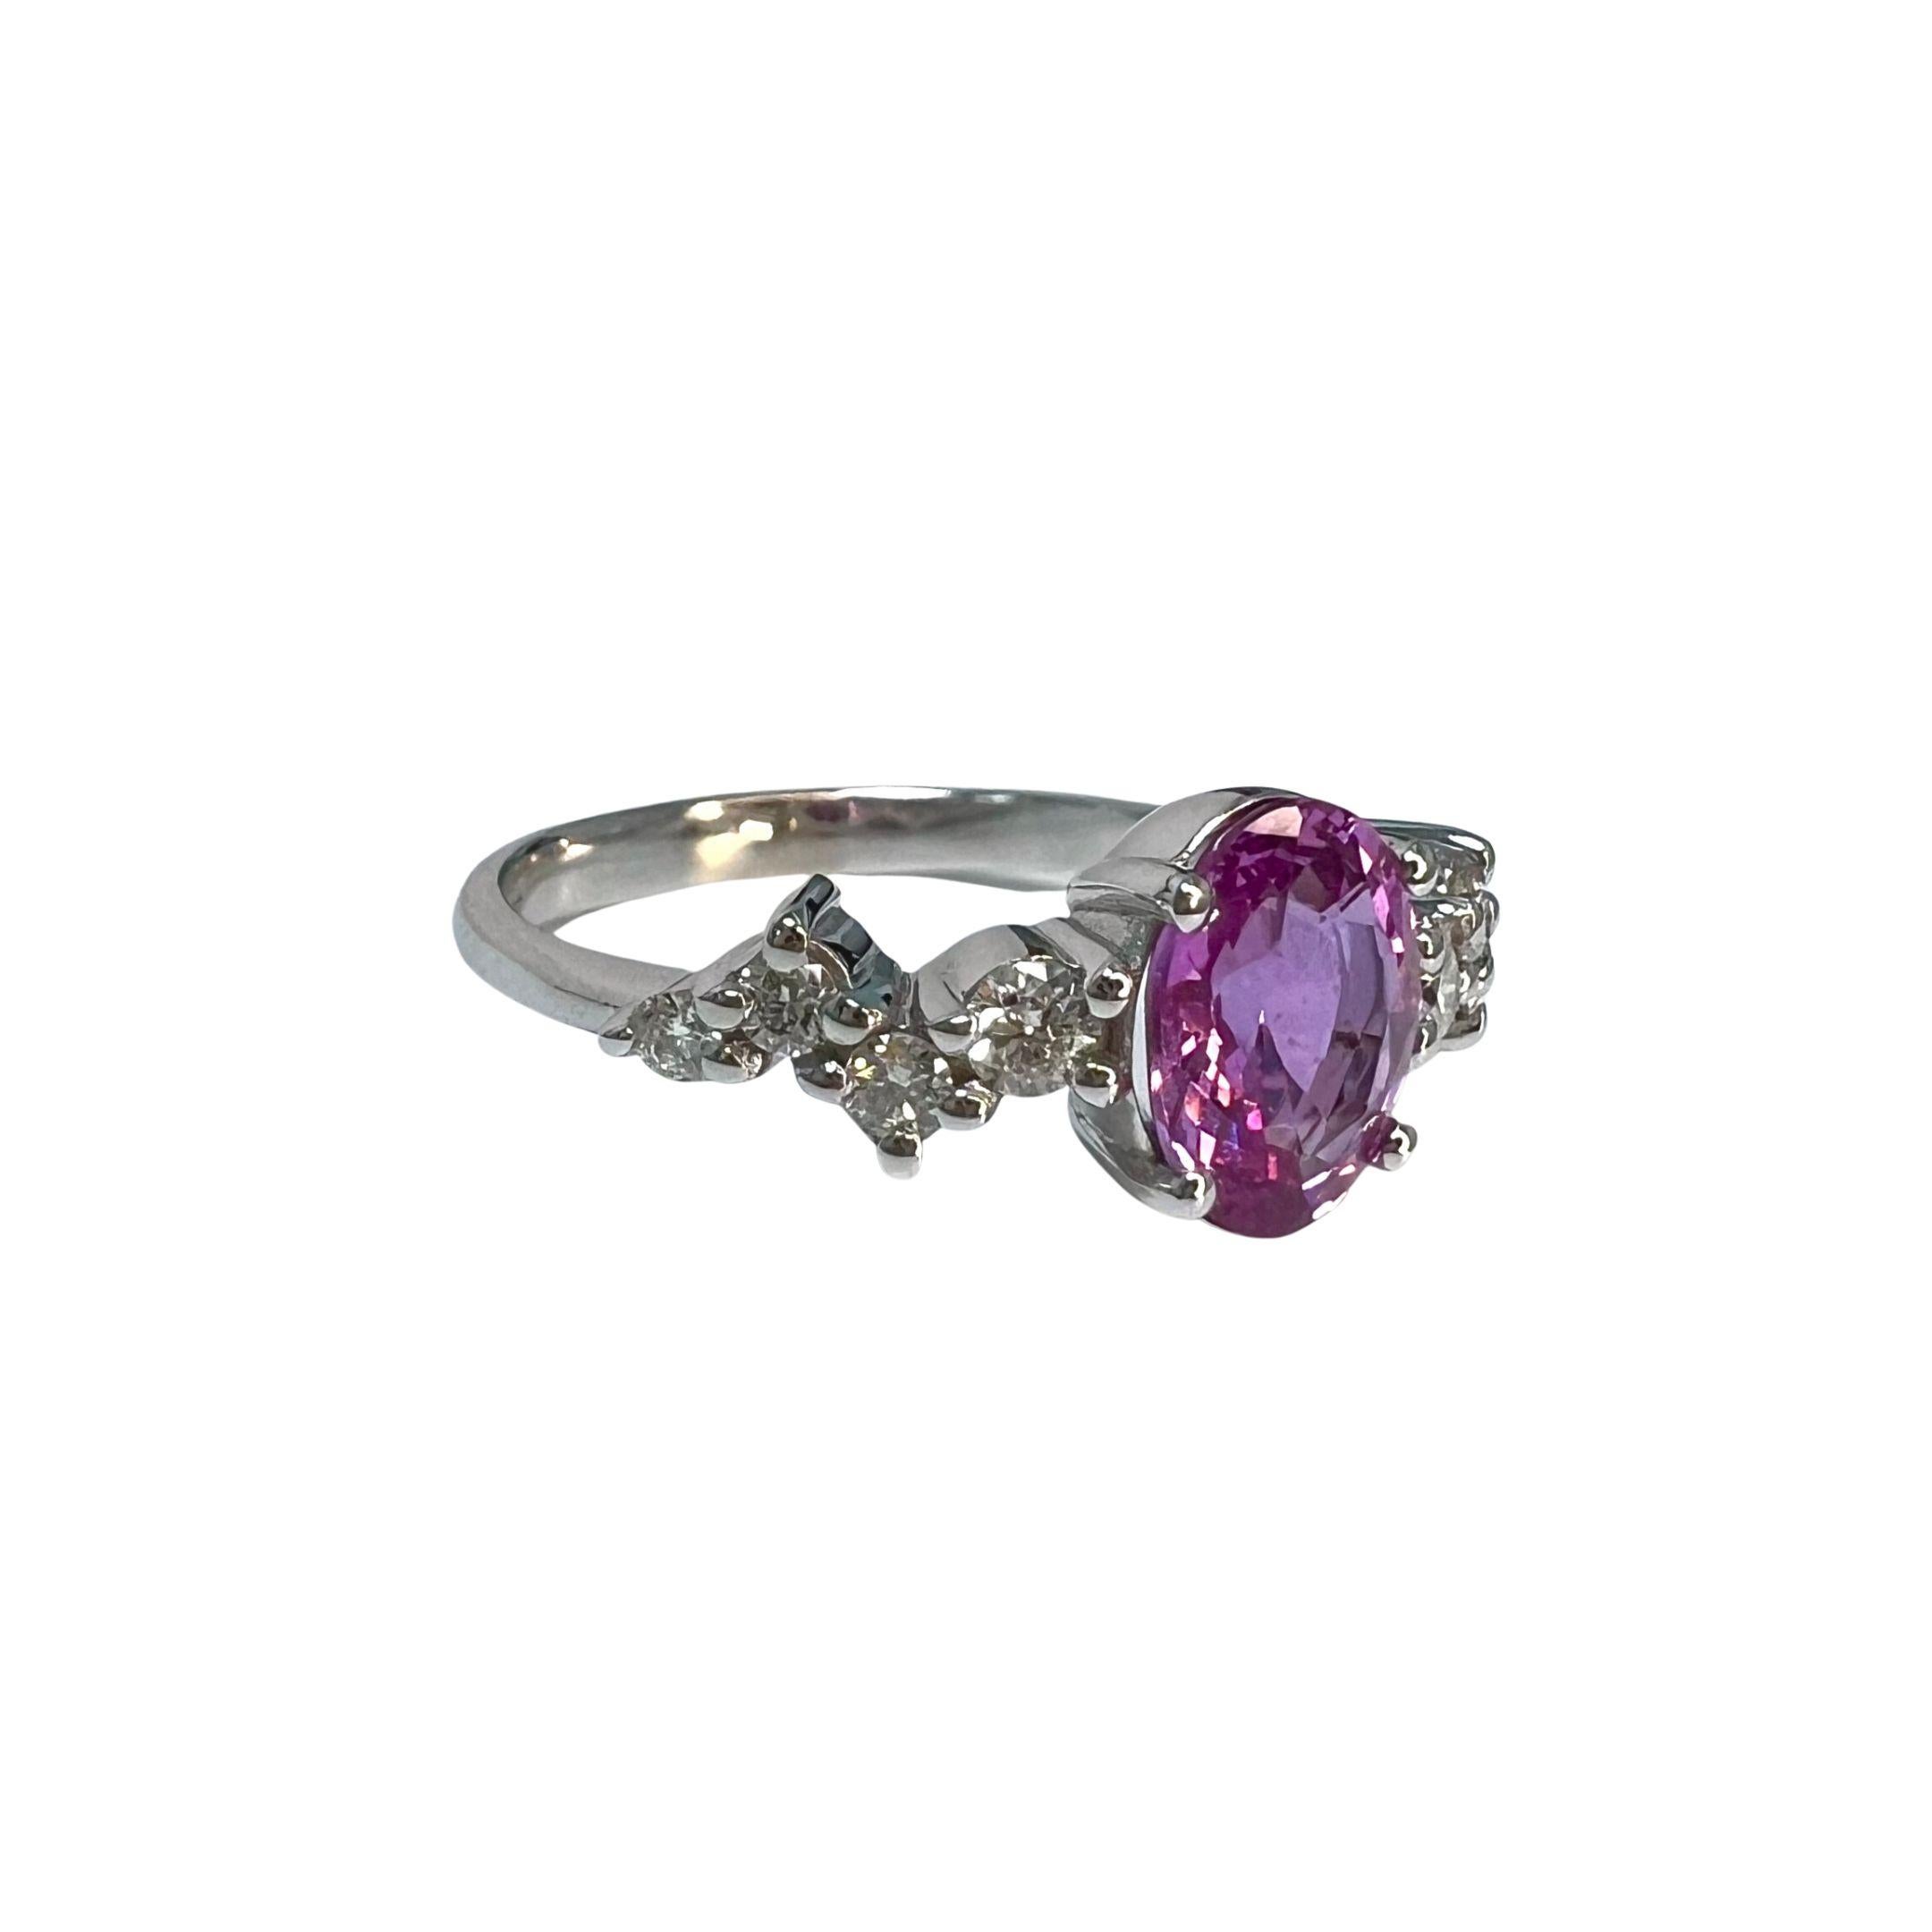 Sapphire Weight: 1.35 CTs
Measurements: 8x6 mm
Diamond Weight: 0.20 CTs
Metal: 18K White Gold 
Gold Weight: 3.41 gm
Ring Size: 6.5
Shape: Oval
Color: Intense Pink
Hardness: 9
Birthstone: September
Product ID: MUR25318/Line 14